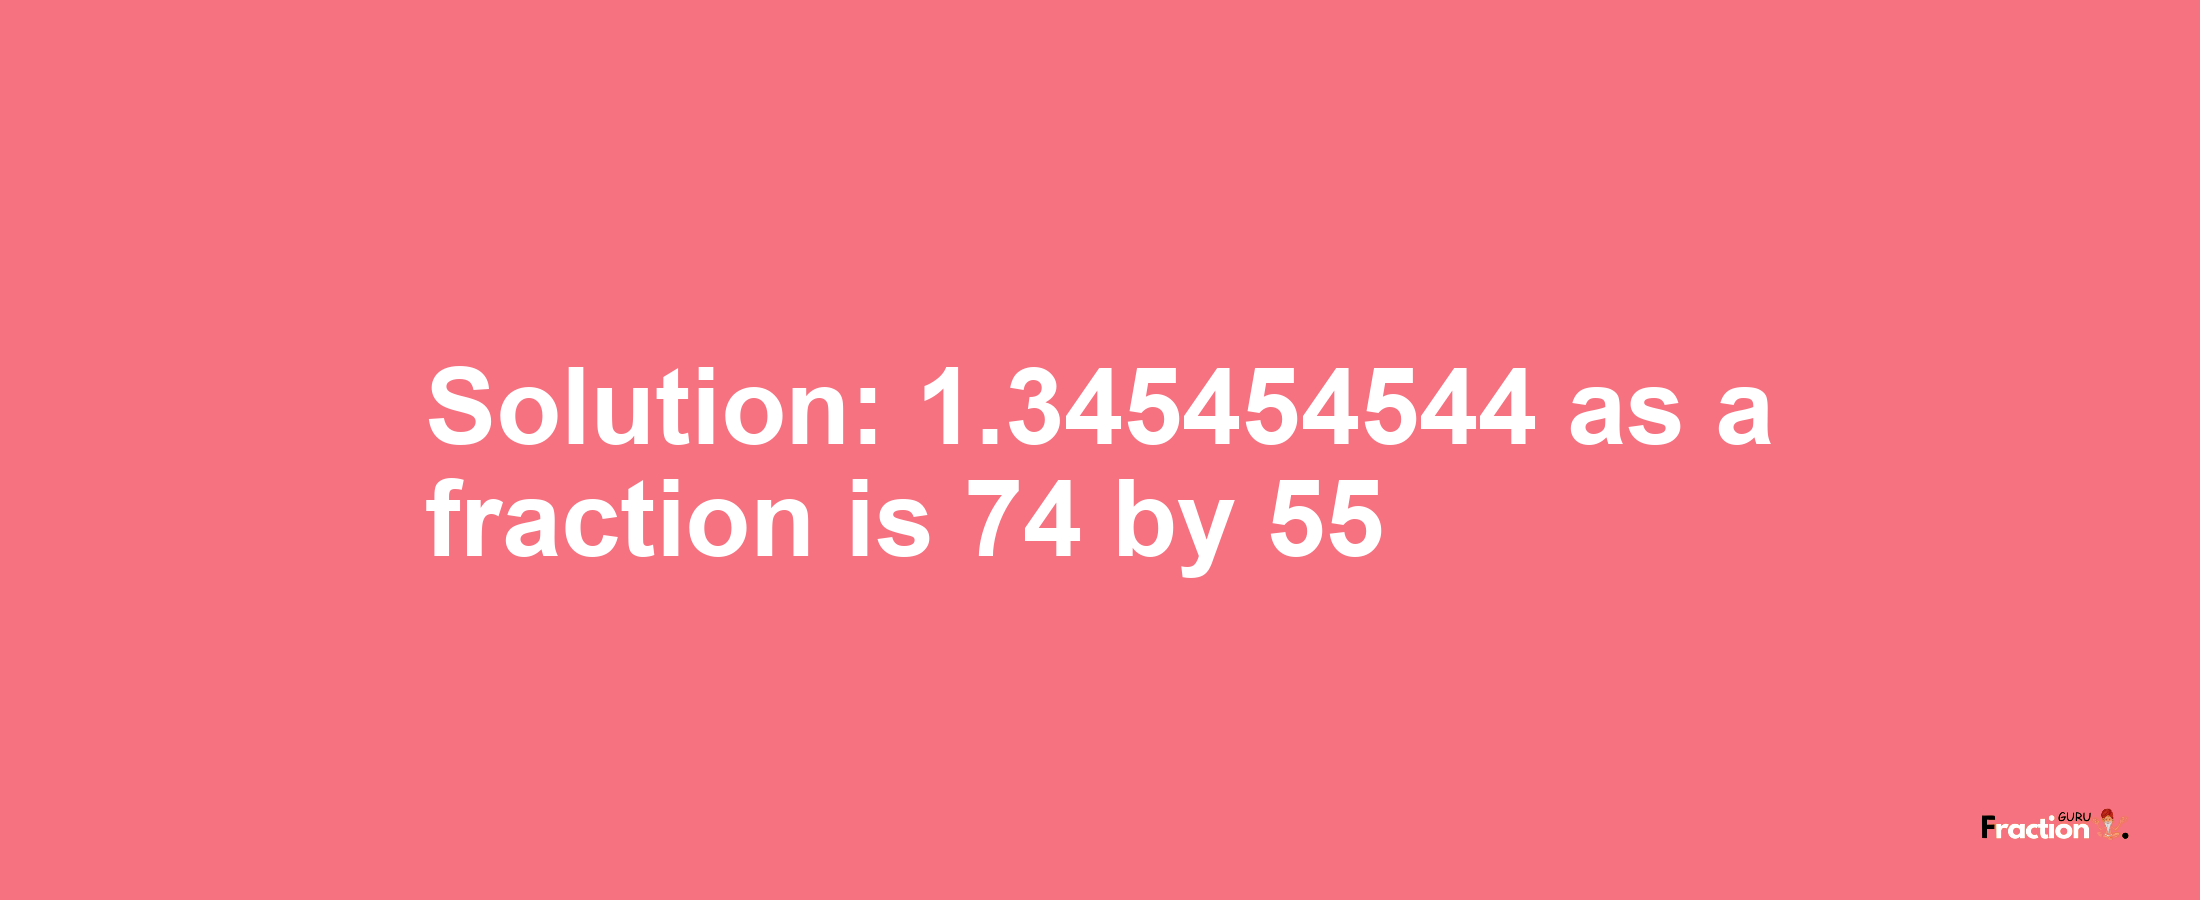 Solution:1.345454544 as a fraction is 74/55